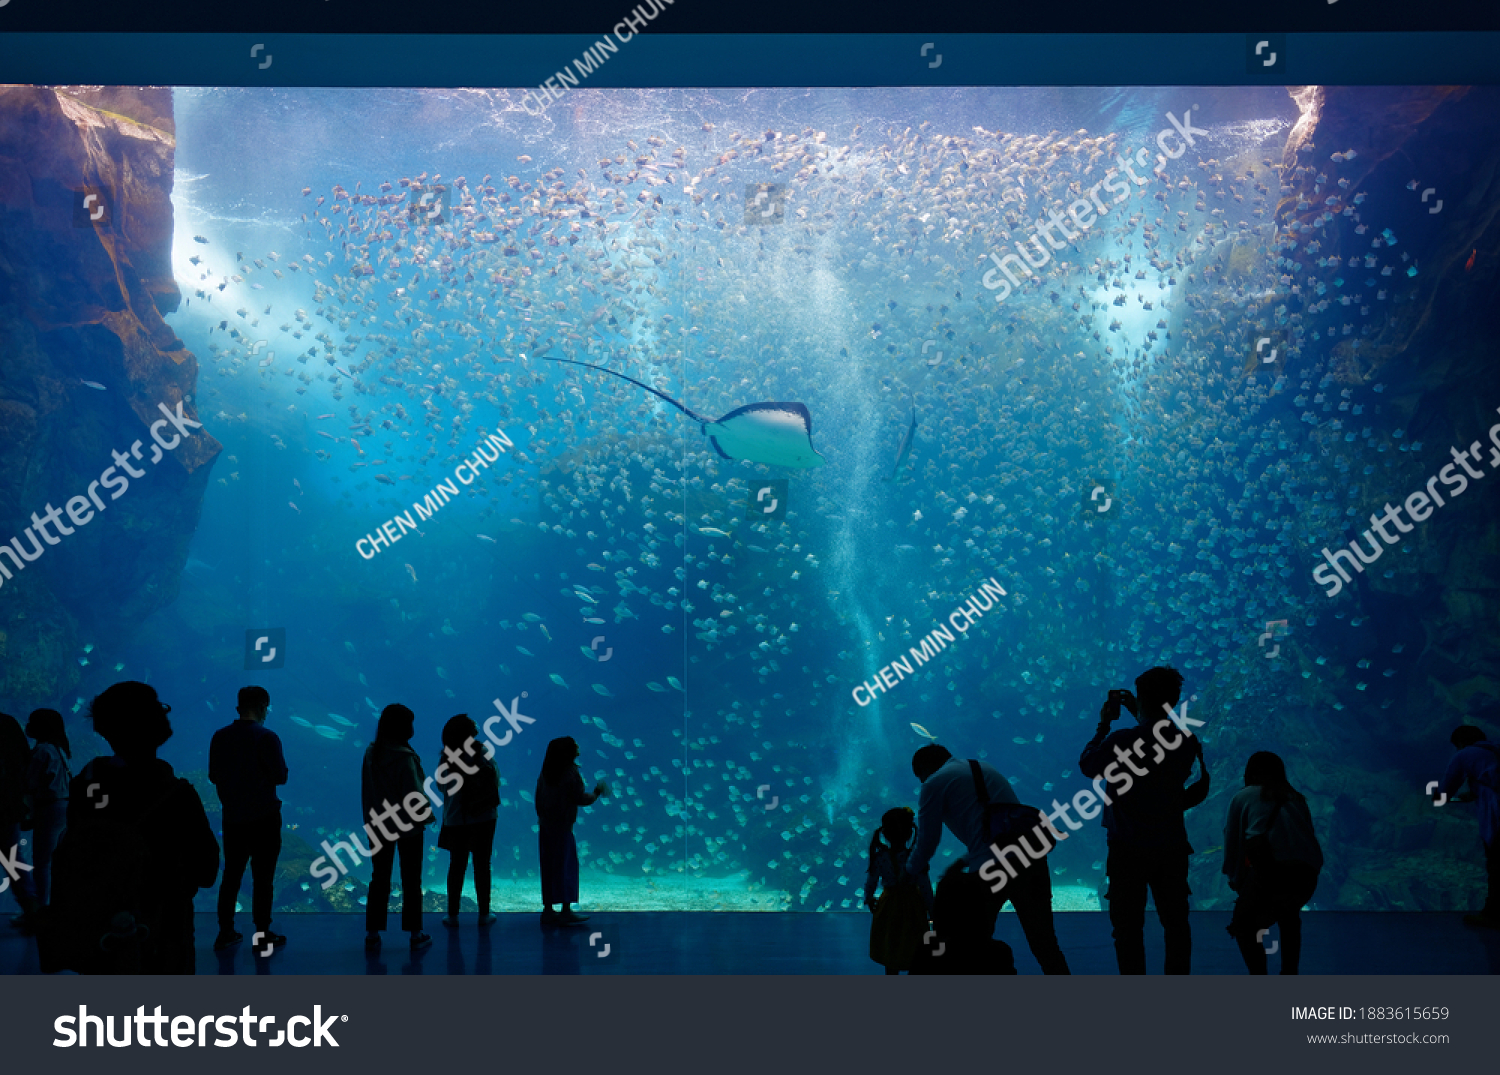 People gazing through the giant glass panel of Xpark Aquarium, Taoyuan, Taiwan, and mesmerized by the scene of a stingray swimming among a shoal of silver moony fish in the mysterious underwater world #1883615659